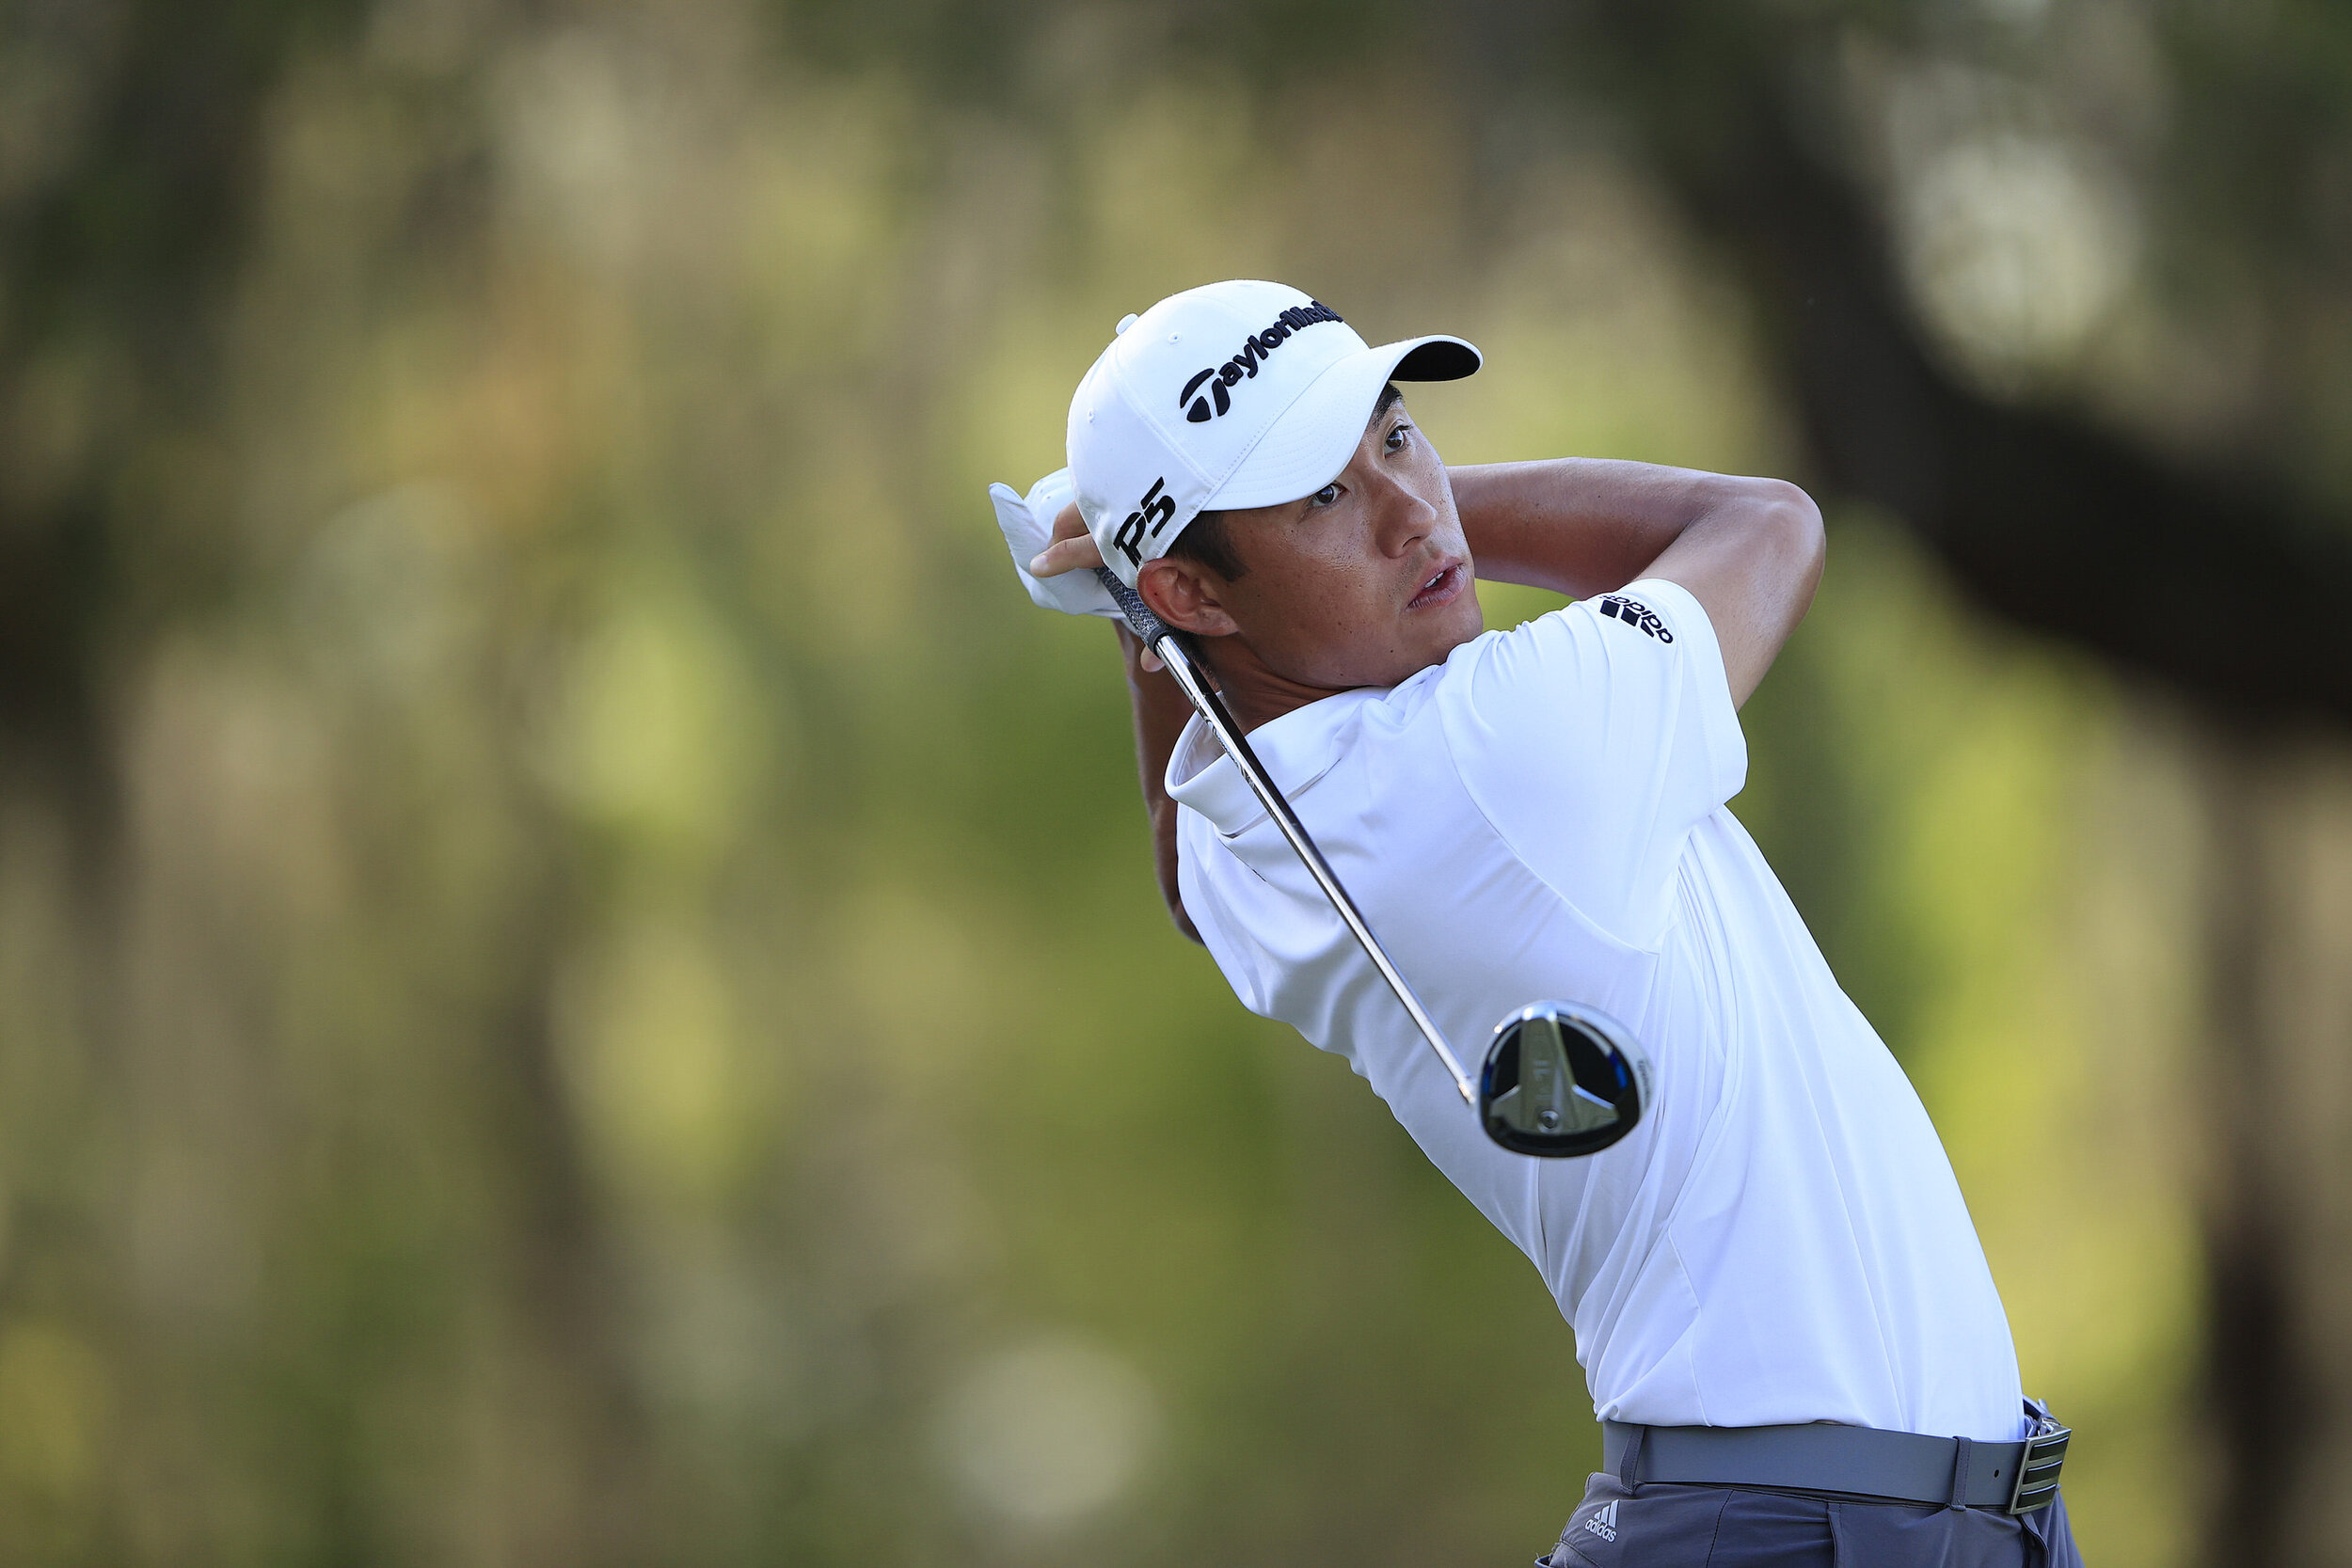  BRADENTON, FLORIDA - FEBRUARY 27: Collin Morikawa of the United States plays his shot from the 15th tee during the third round of the World Golf Championships-Workday Championship at The Concession on February 27, 2021 in Bradenton, Florida. (Photo 